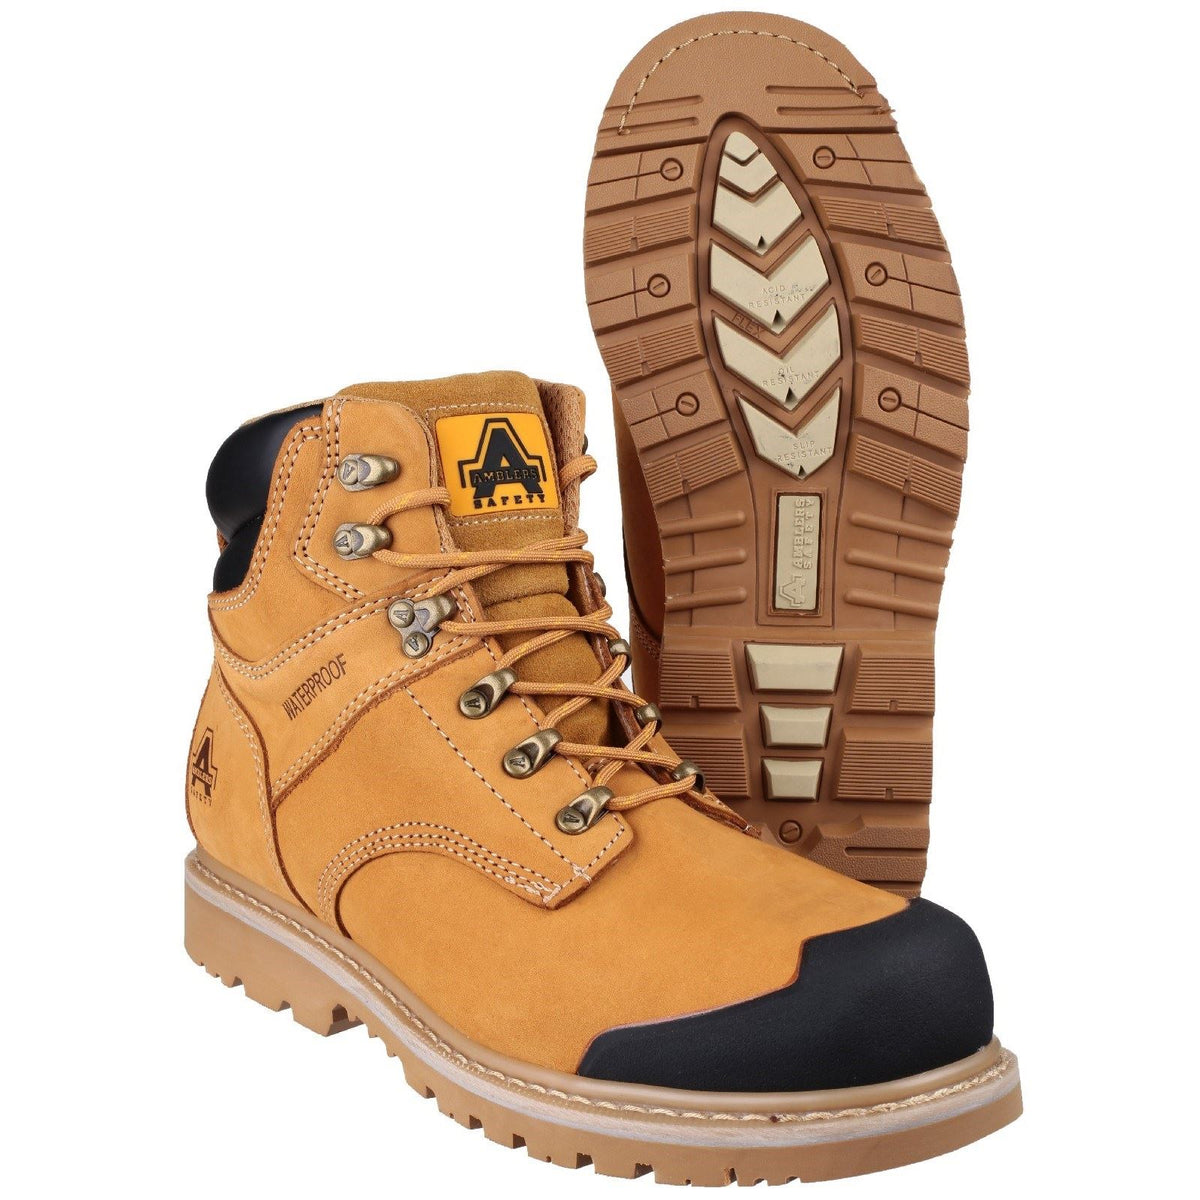 Amblers Safety FS226 Industrial Safety Boots